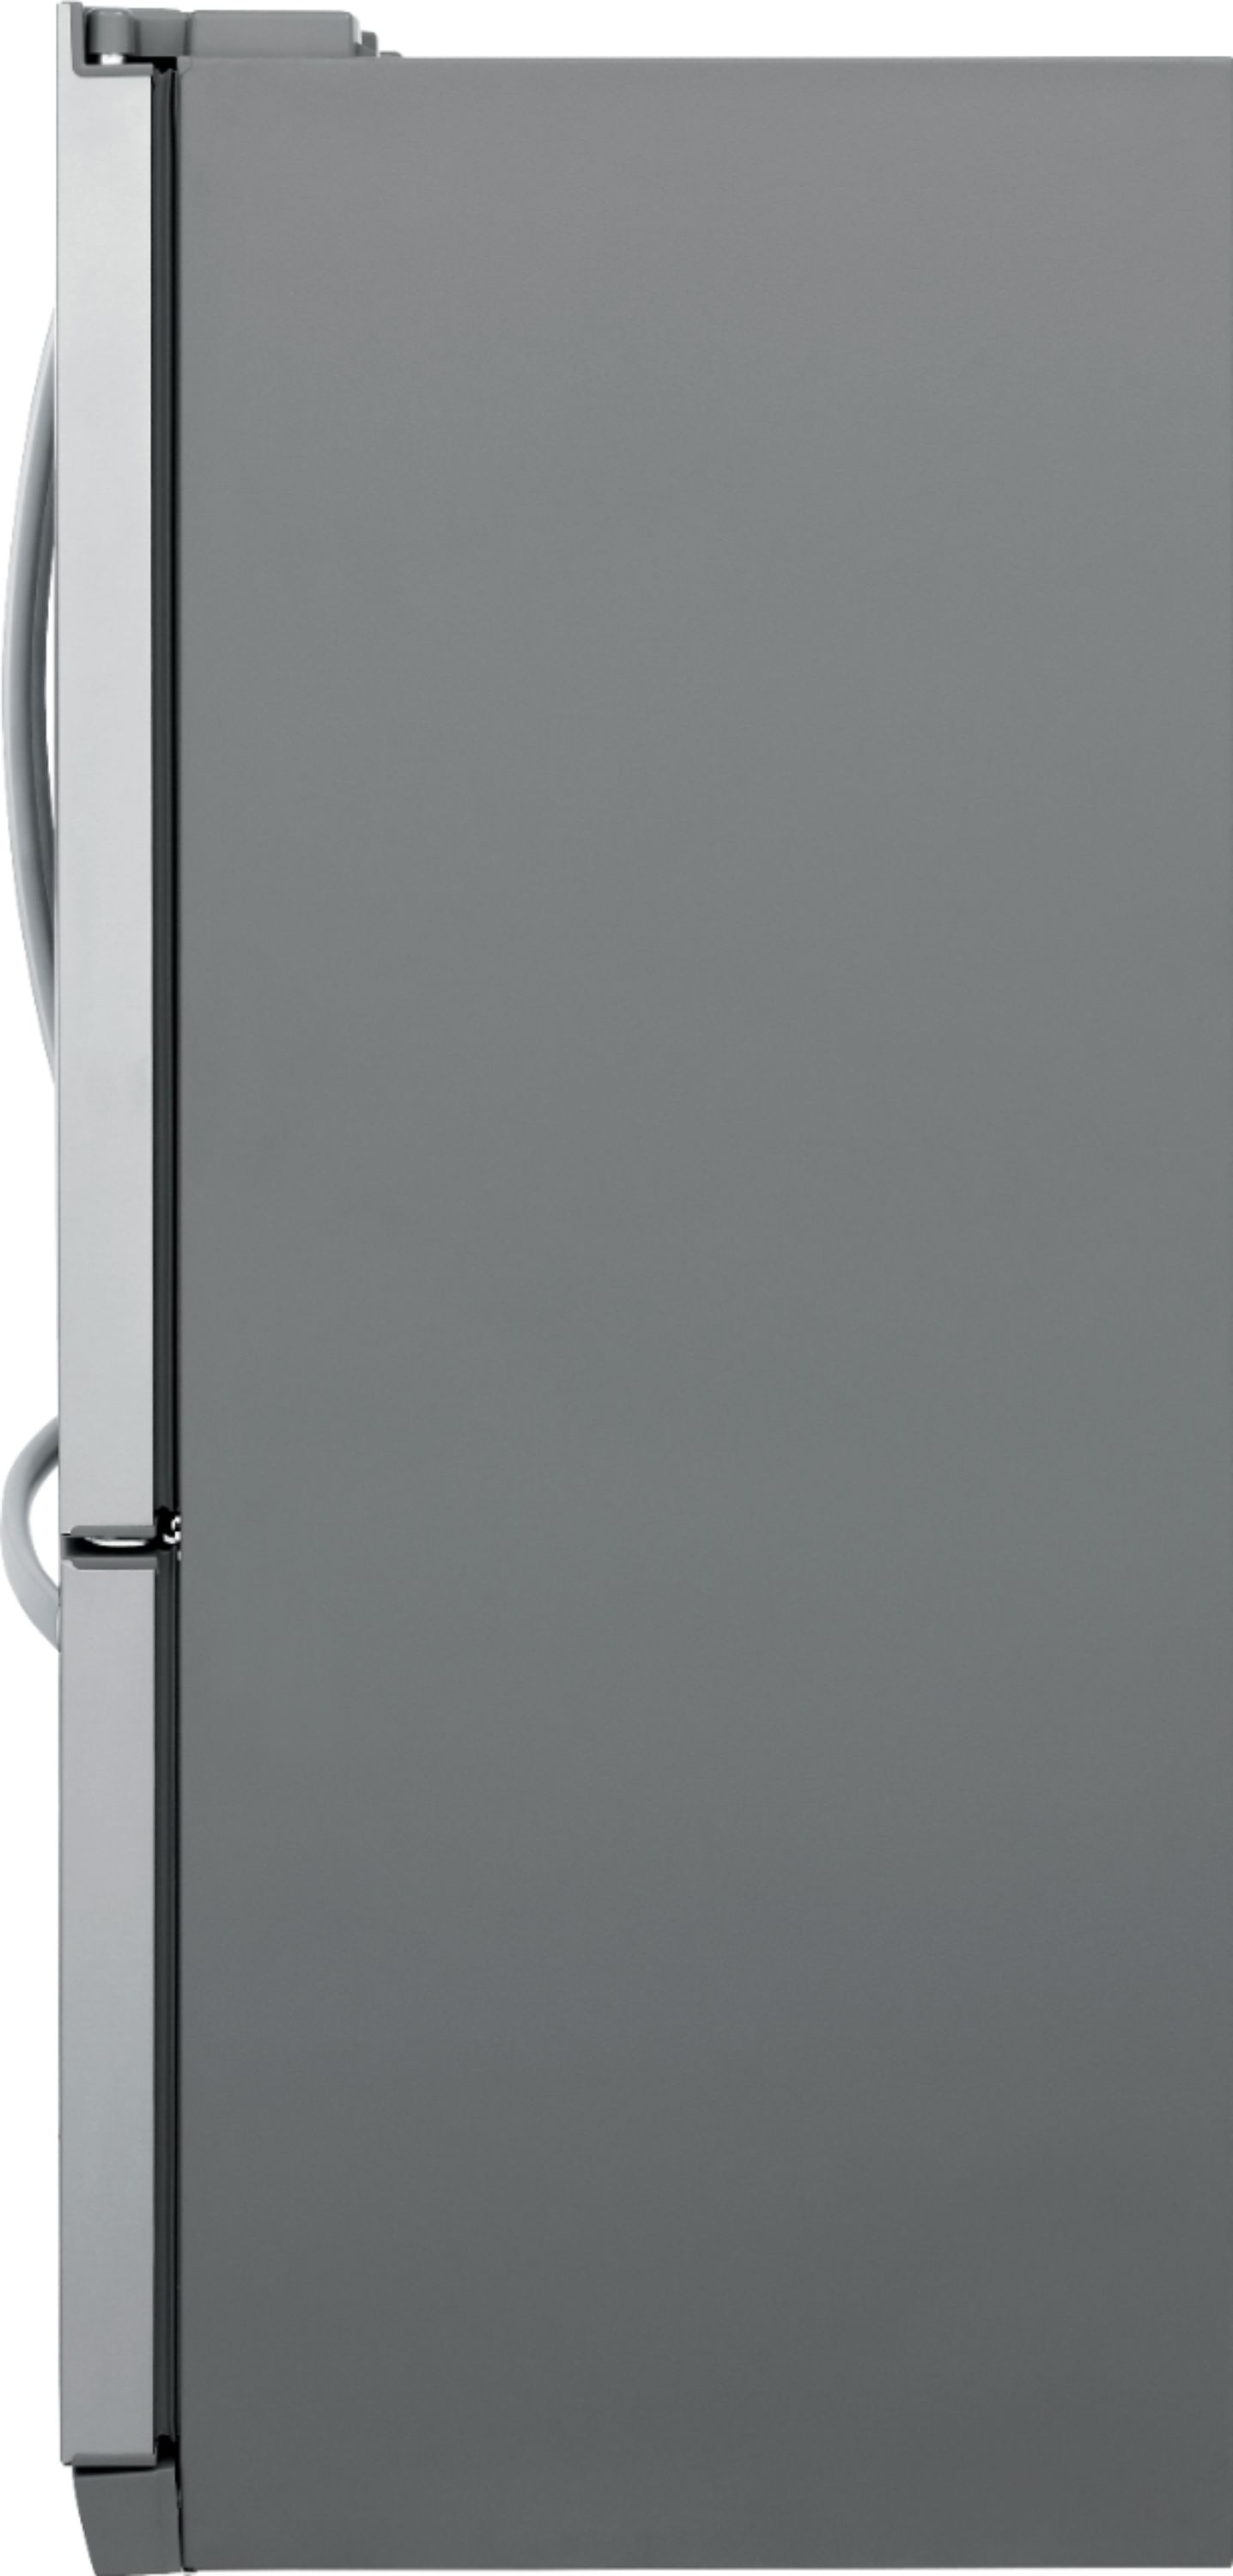 Angle View: Frigidaire - 27.6 Cu. Ft. French Door Refrigerator - Stainless steel